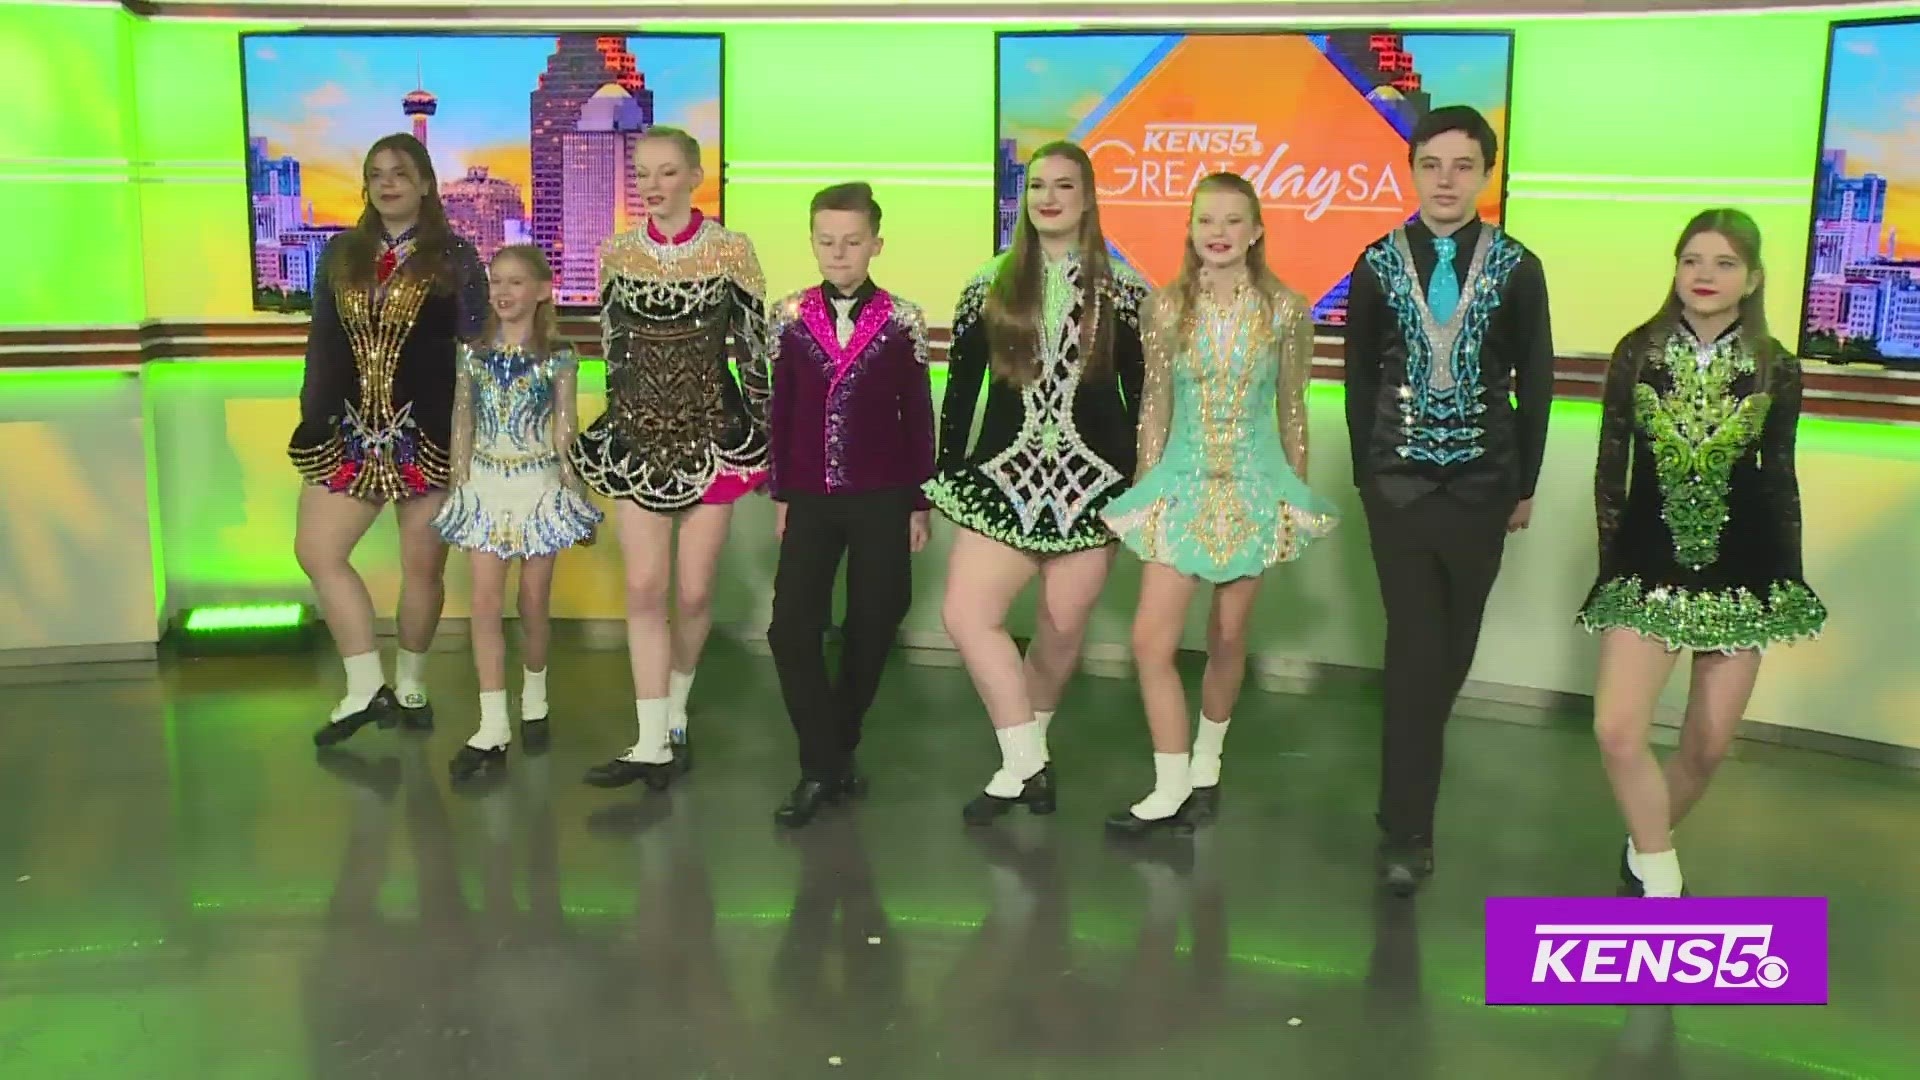 The Inishfree School of Irish Dance performs a traditional dance routine for St. Patrick's Day.